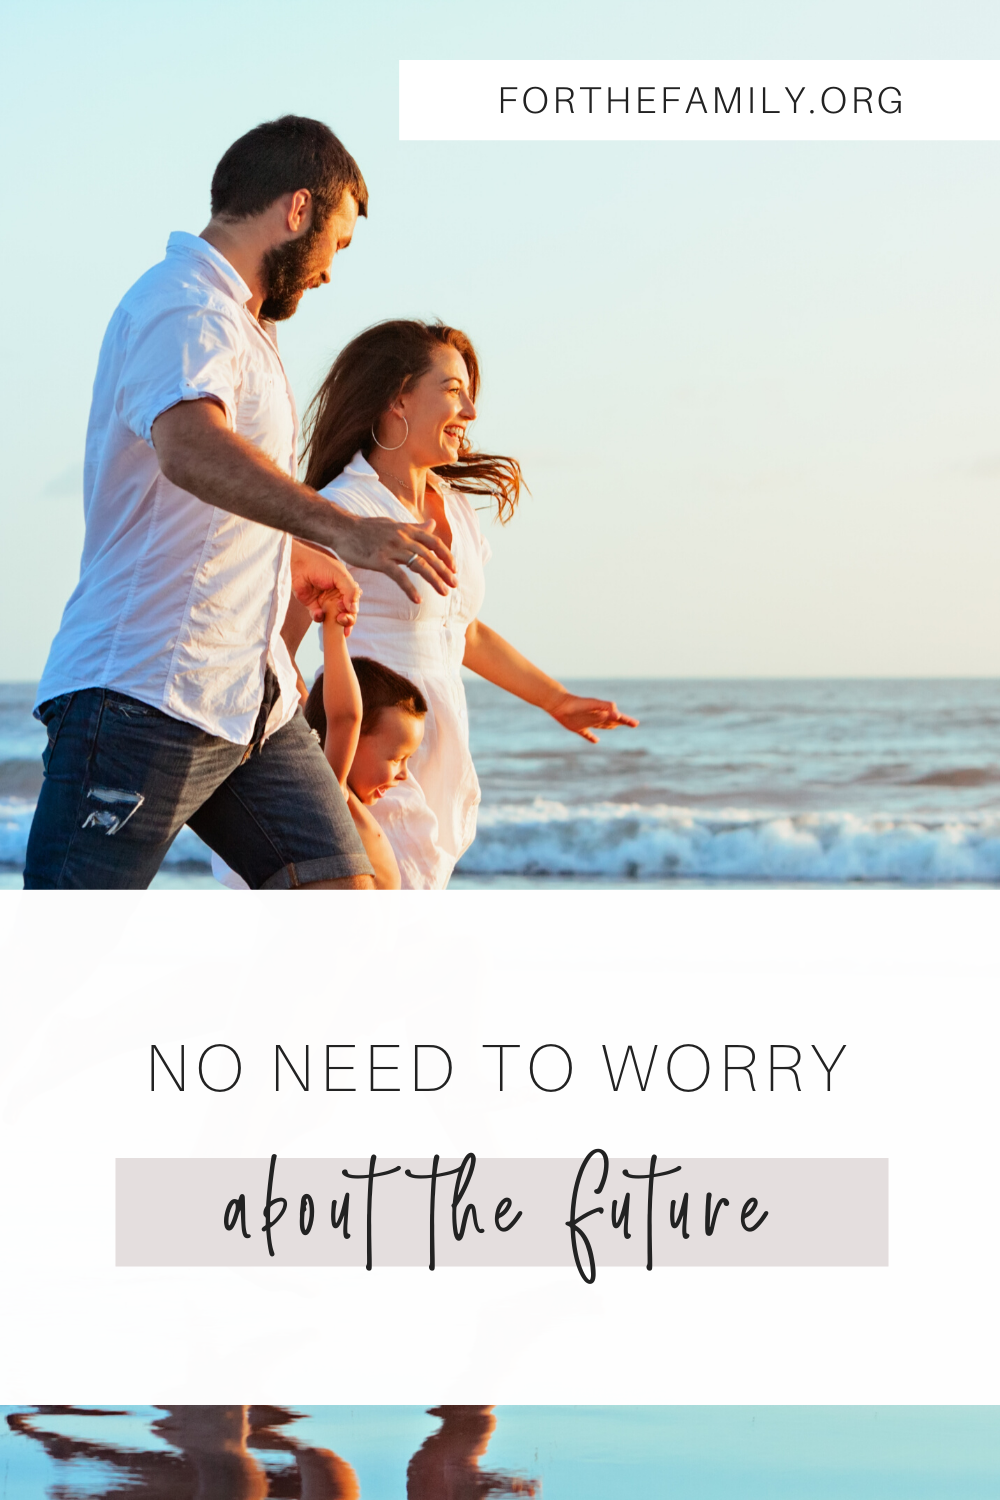 As our kids grow up and the world continues to change, it is easy to worry about the future of our children. However, our job as Christian parents is not to worry because we have a God that walks beside our children into their future. He's laid His hand upon them and guides their way!